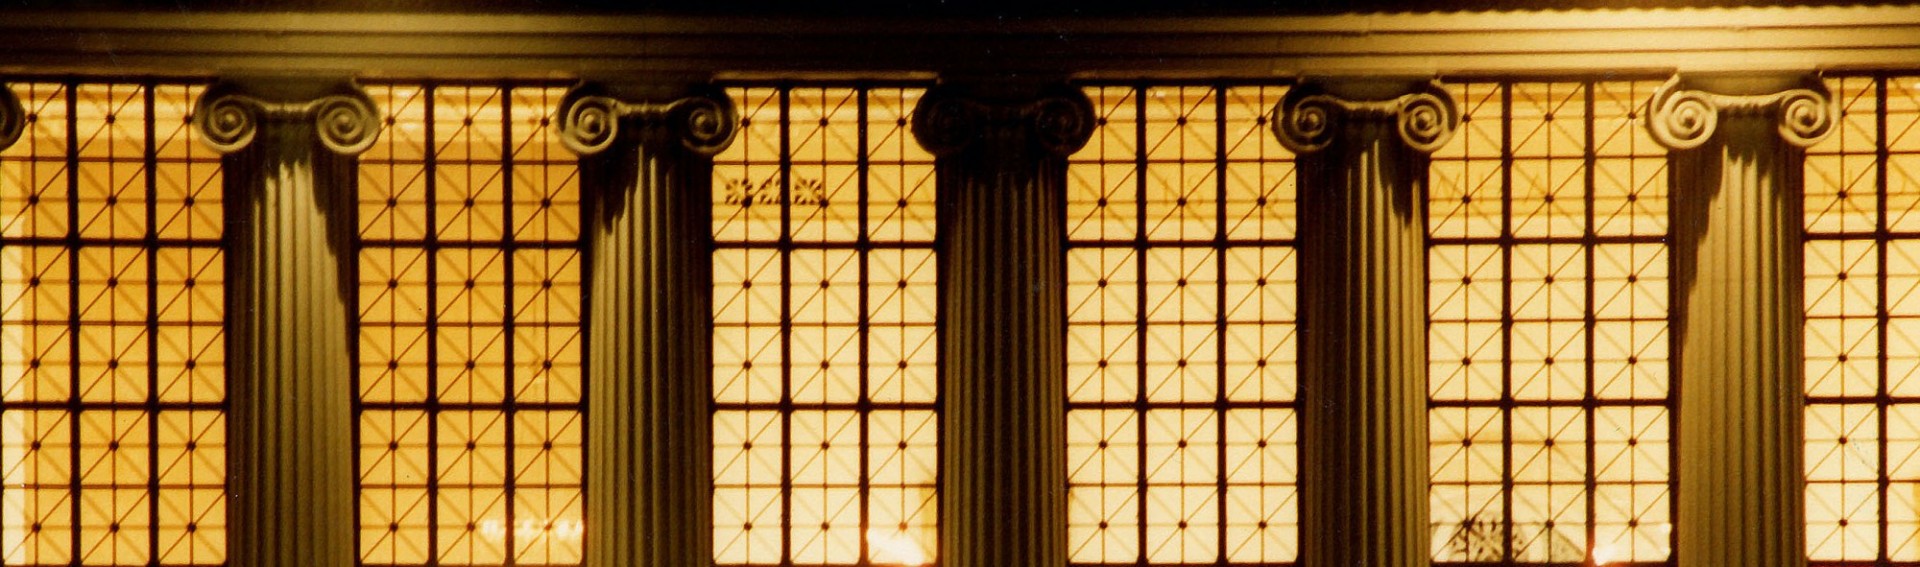 Image of Columbia University's Butler Library, displaying the exterior windows and pillars at night